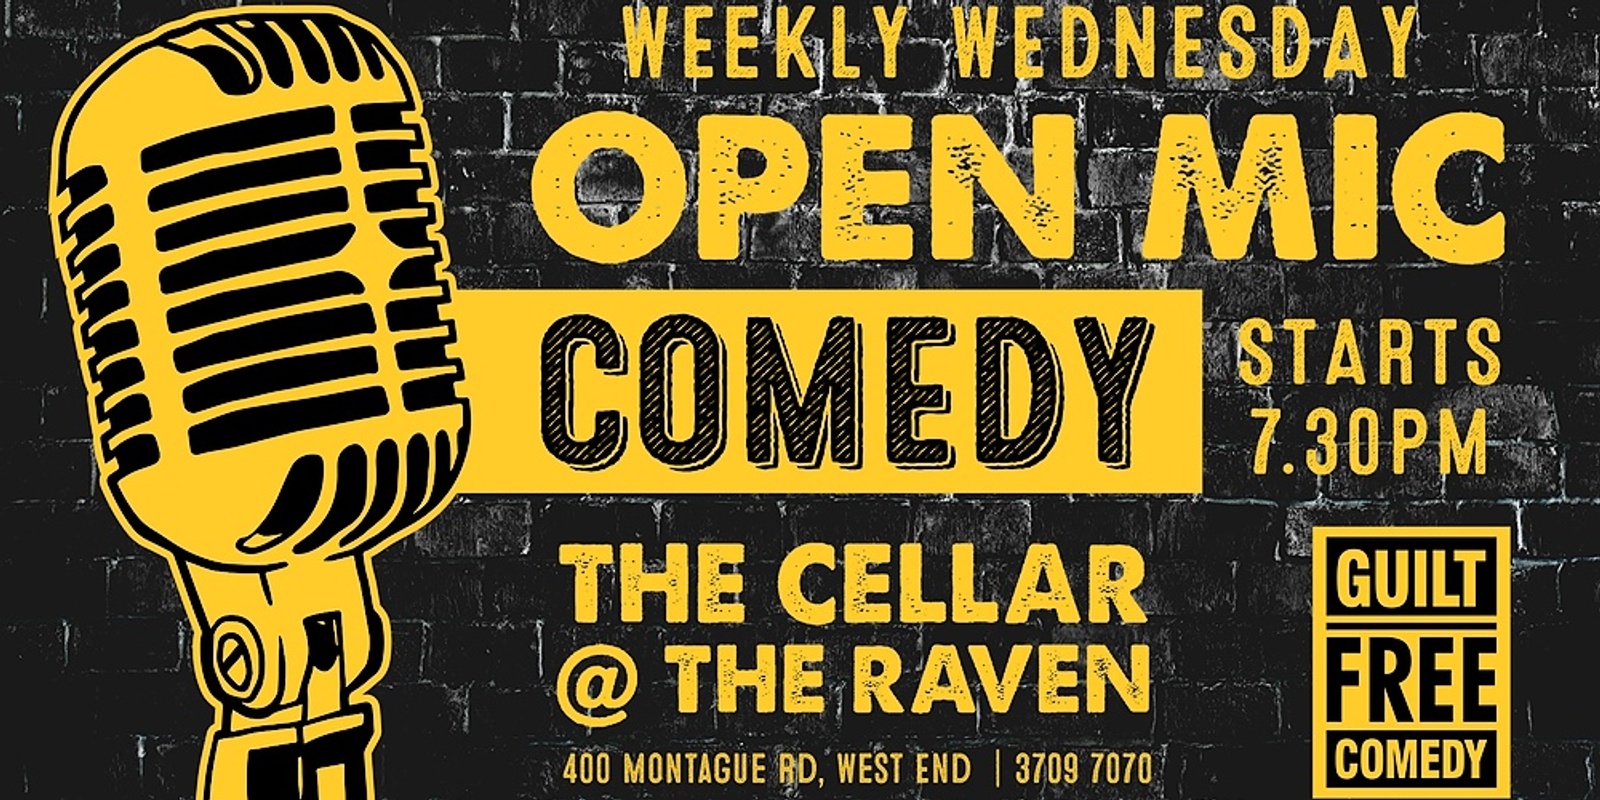 Weekly Wednesday Open Mic Night - May - Guilt Free Comedy Cellar